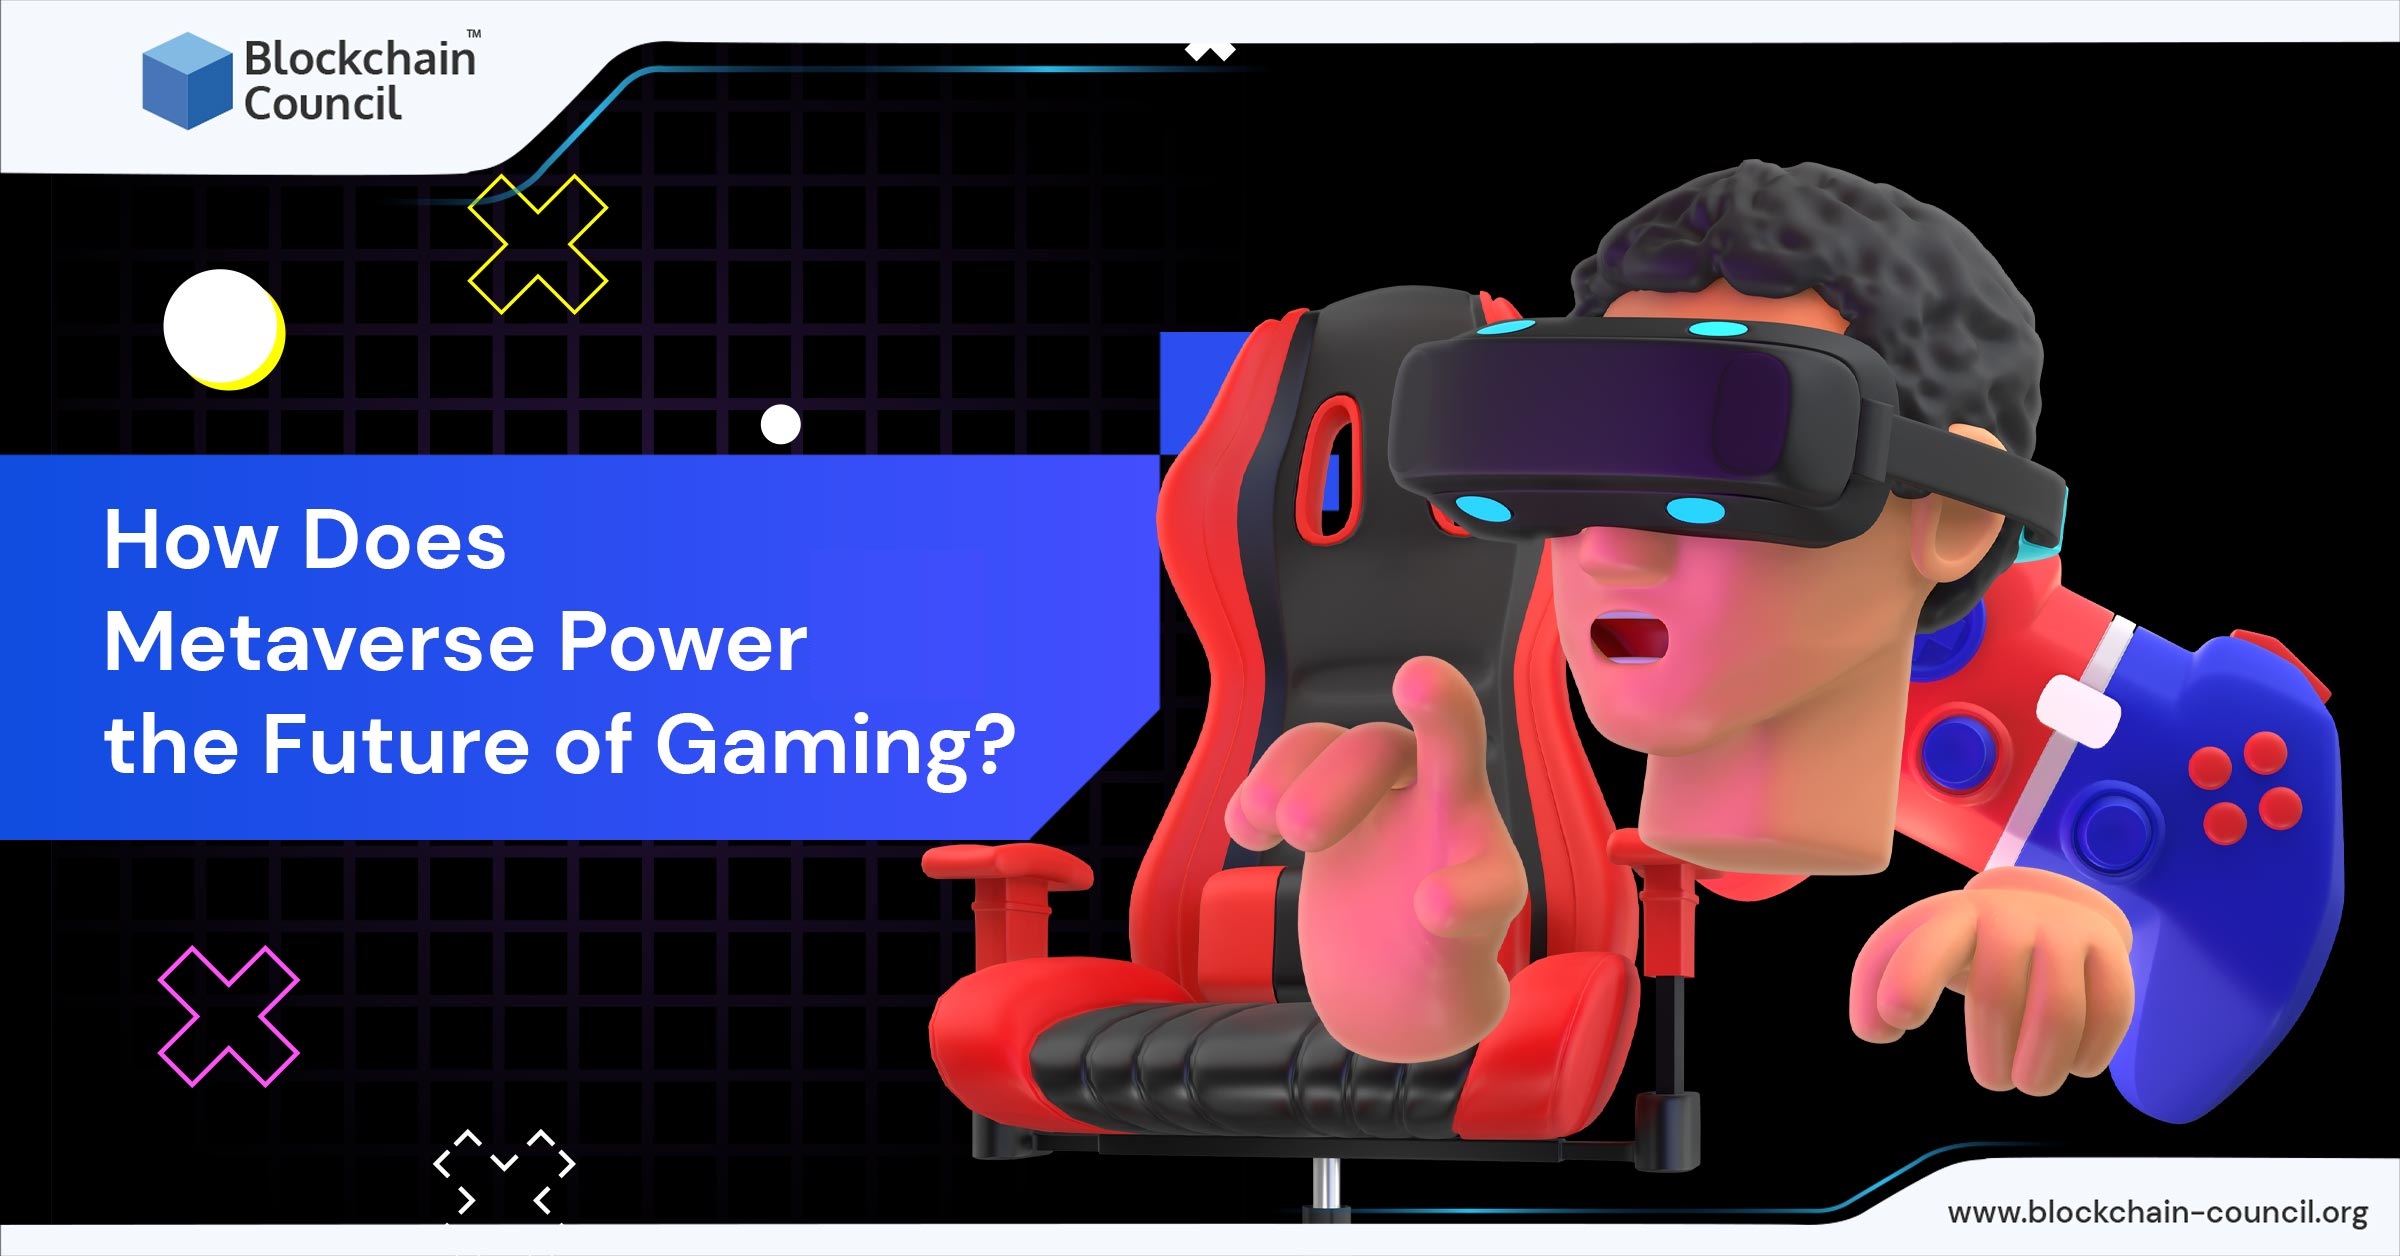 How Does Metaverse Power the Future of Gaming